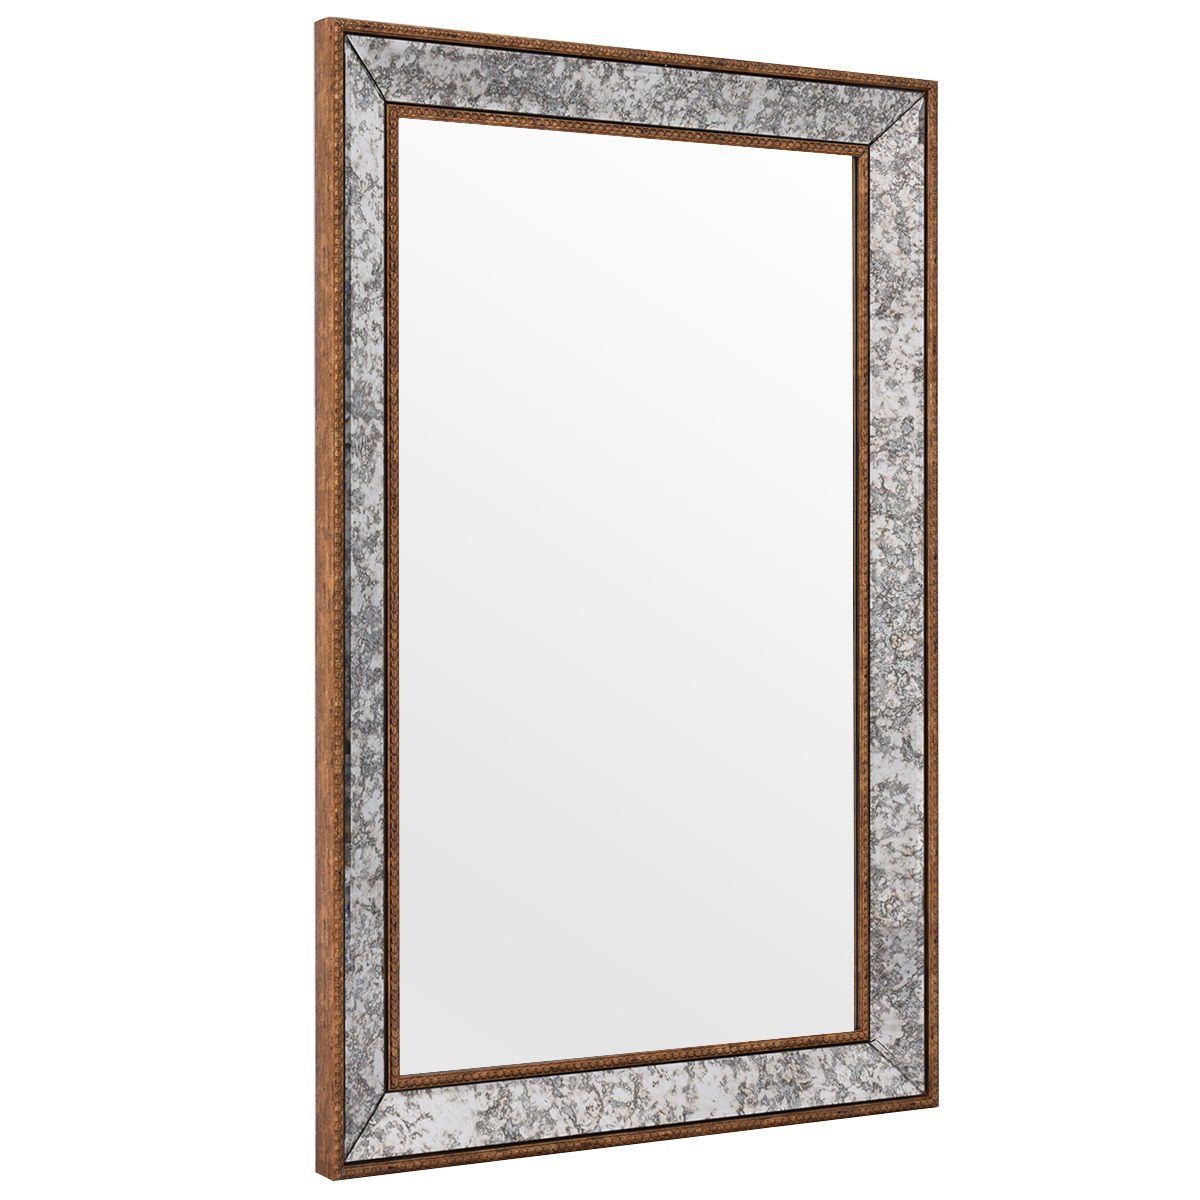 Tangkula 36' Wall Mirror Beveled Mirror Rectangle Bathroom Home Decor Throughout Rounded Cut Edge Wall Mirrors (View 10 of 15)